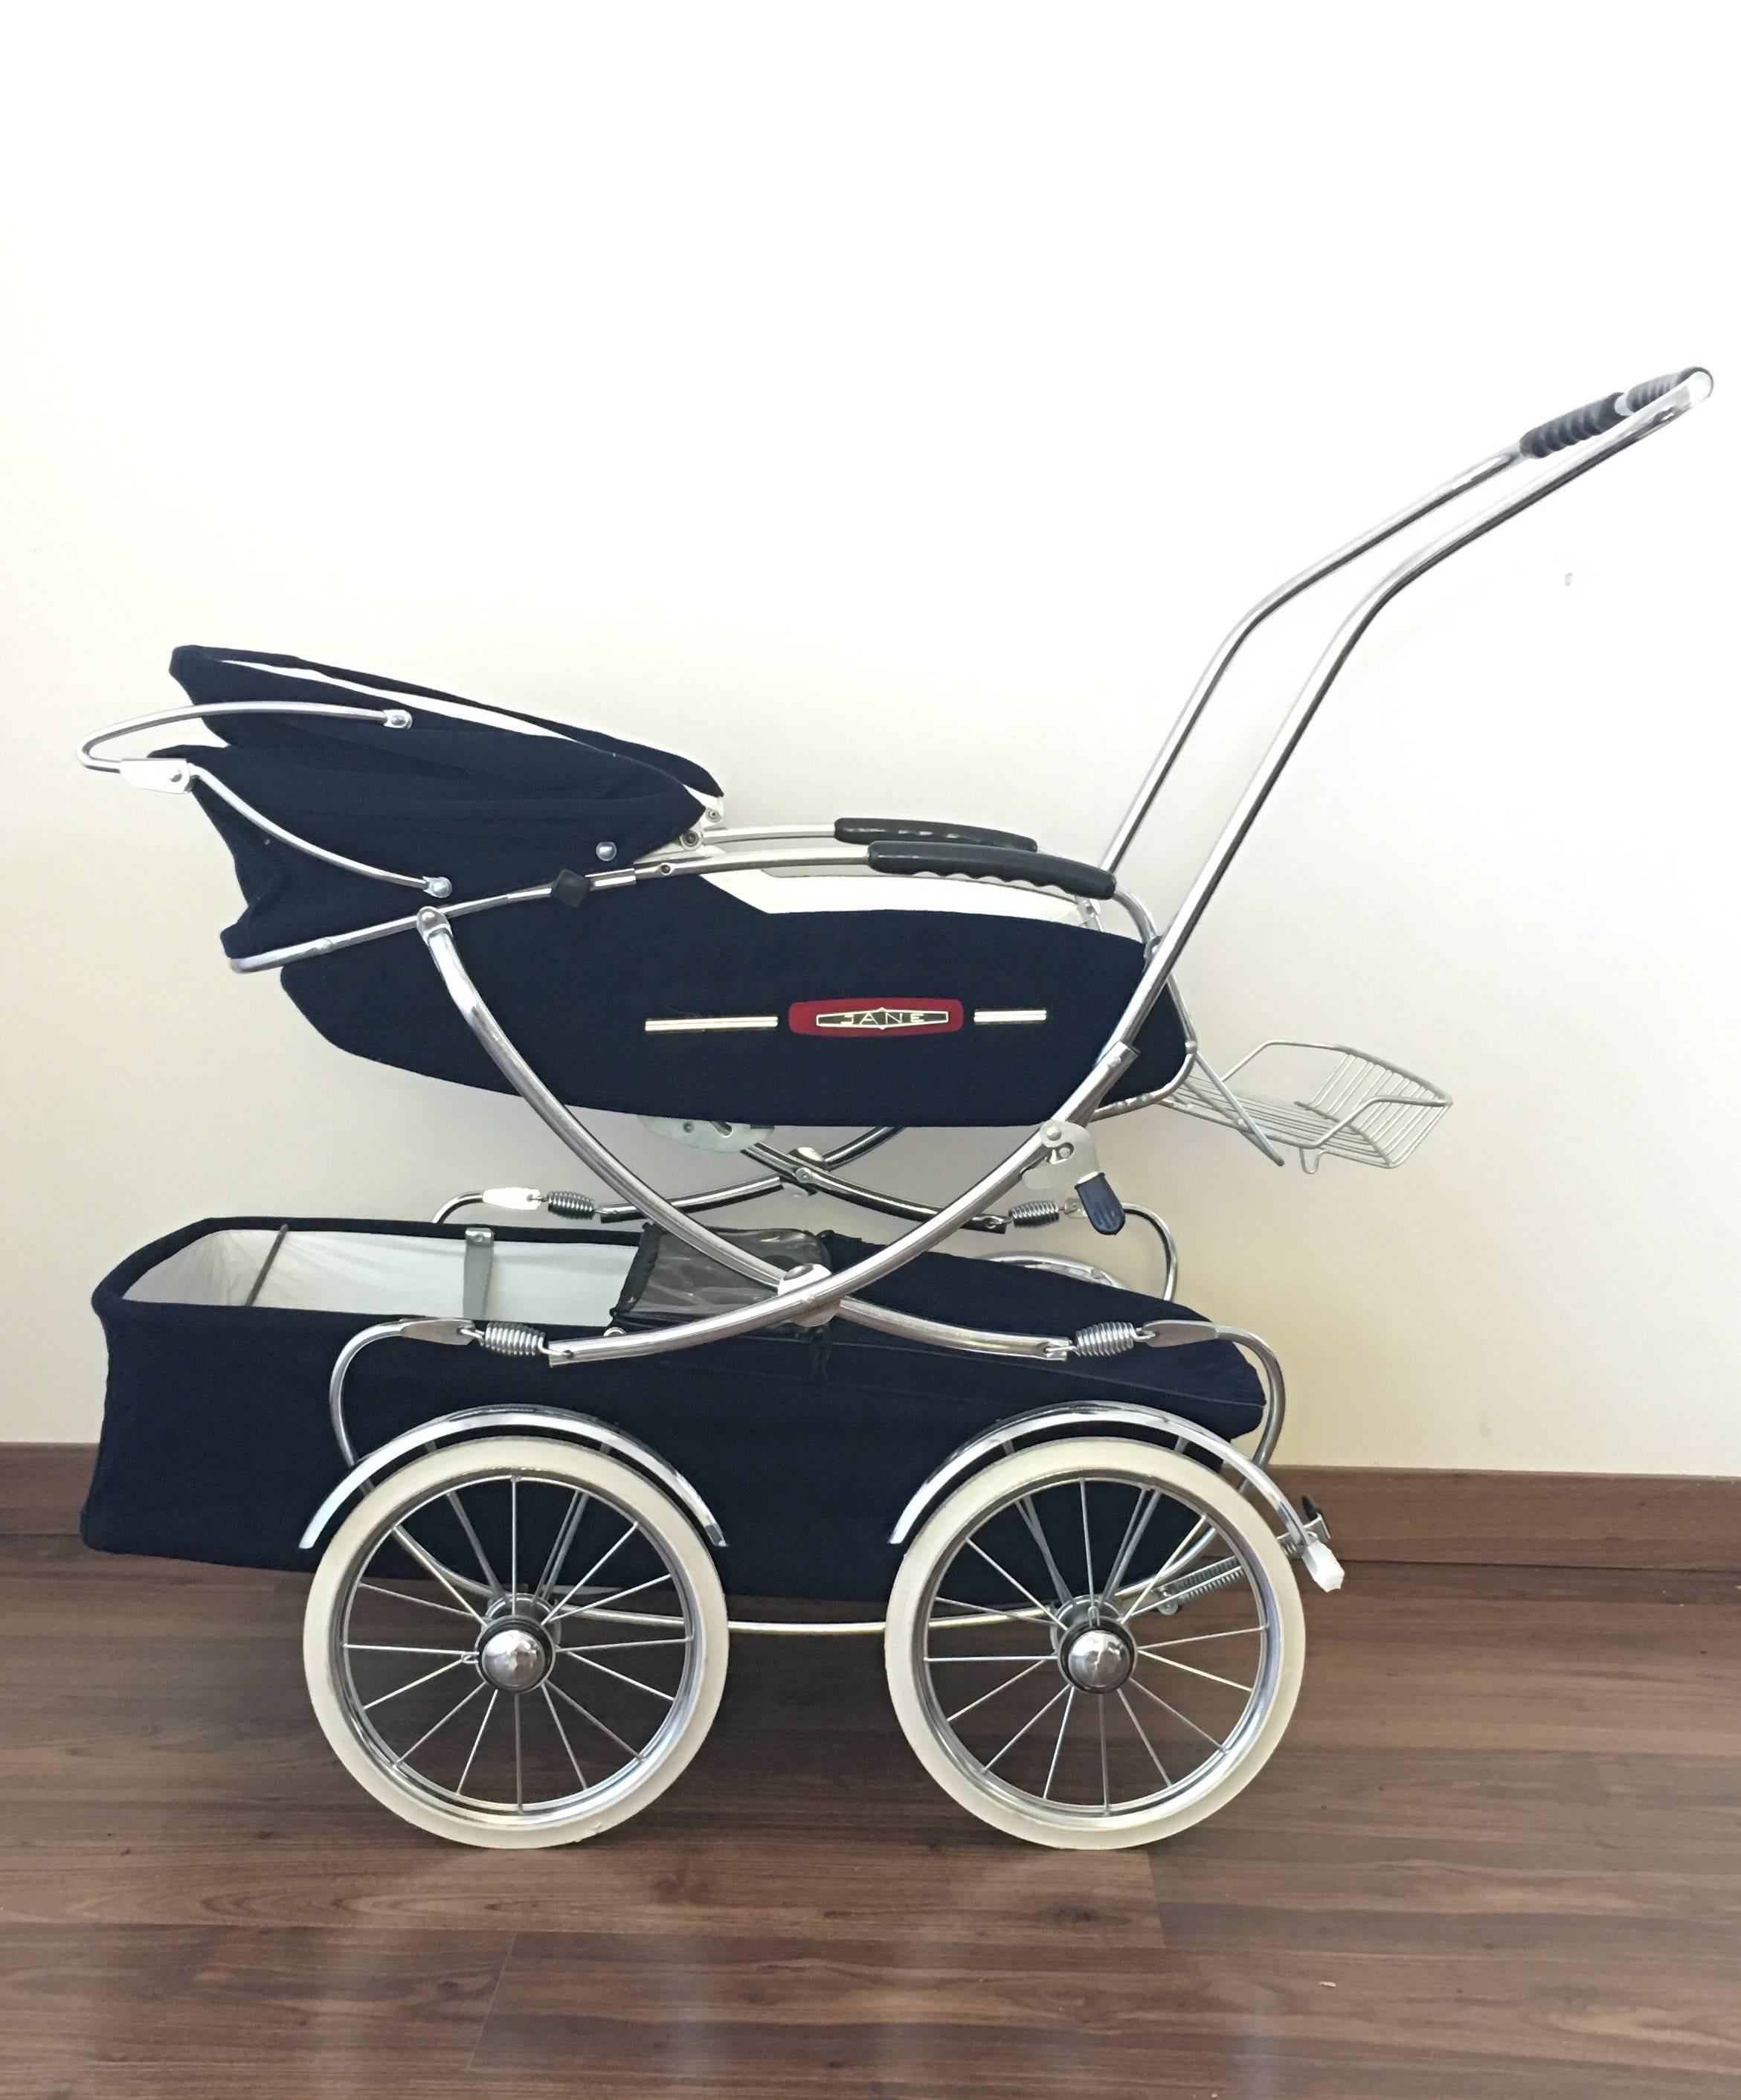 20th century fancy baby carriage, baby stroller.
It´s in perfect condition for use.